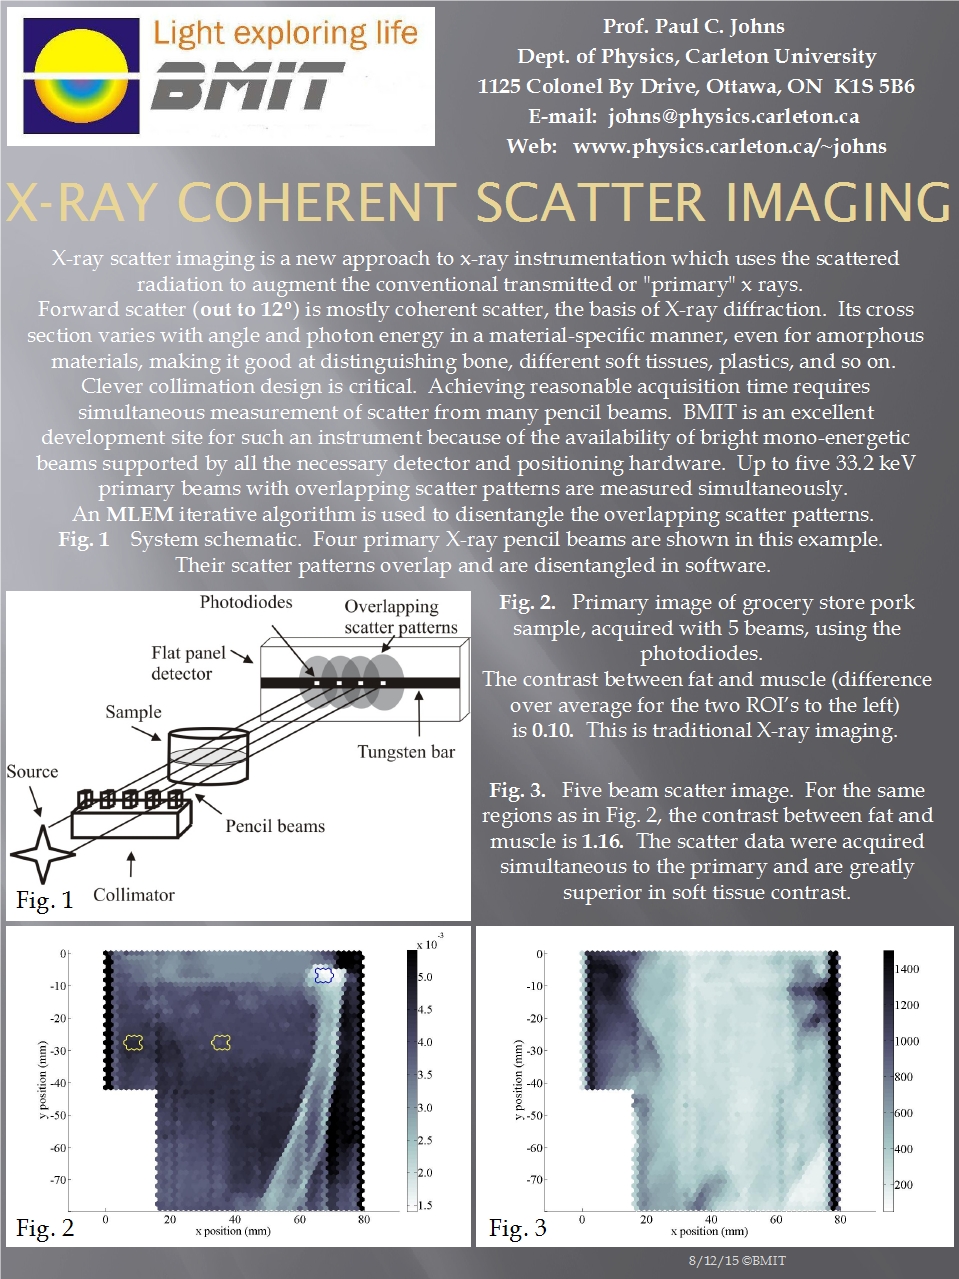 X-Ray Coherent Scatter Imaging Image